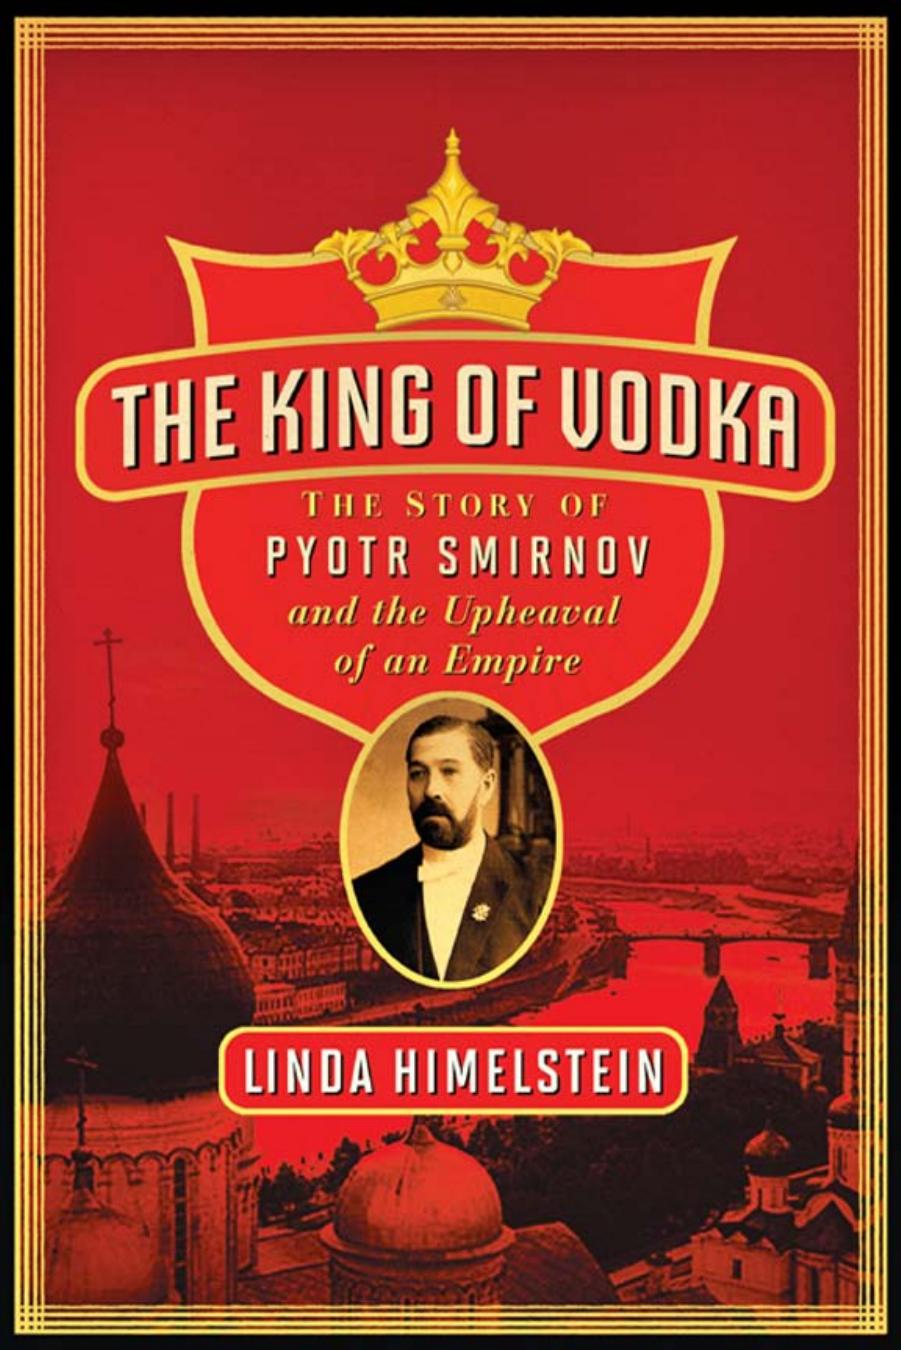 The King of Vodka by Linda Himelstein